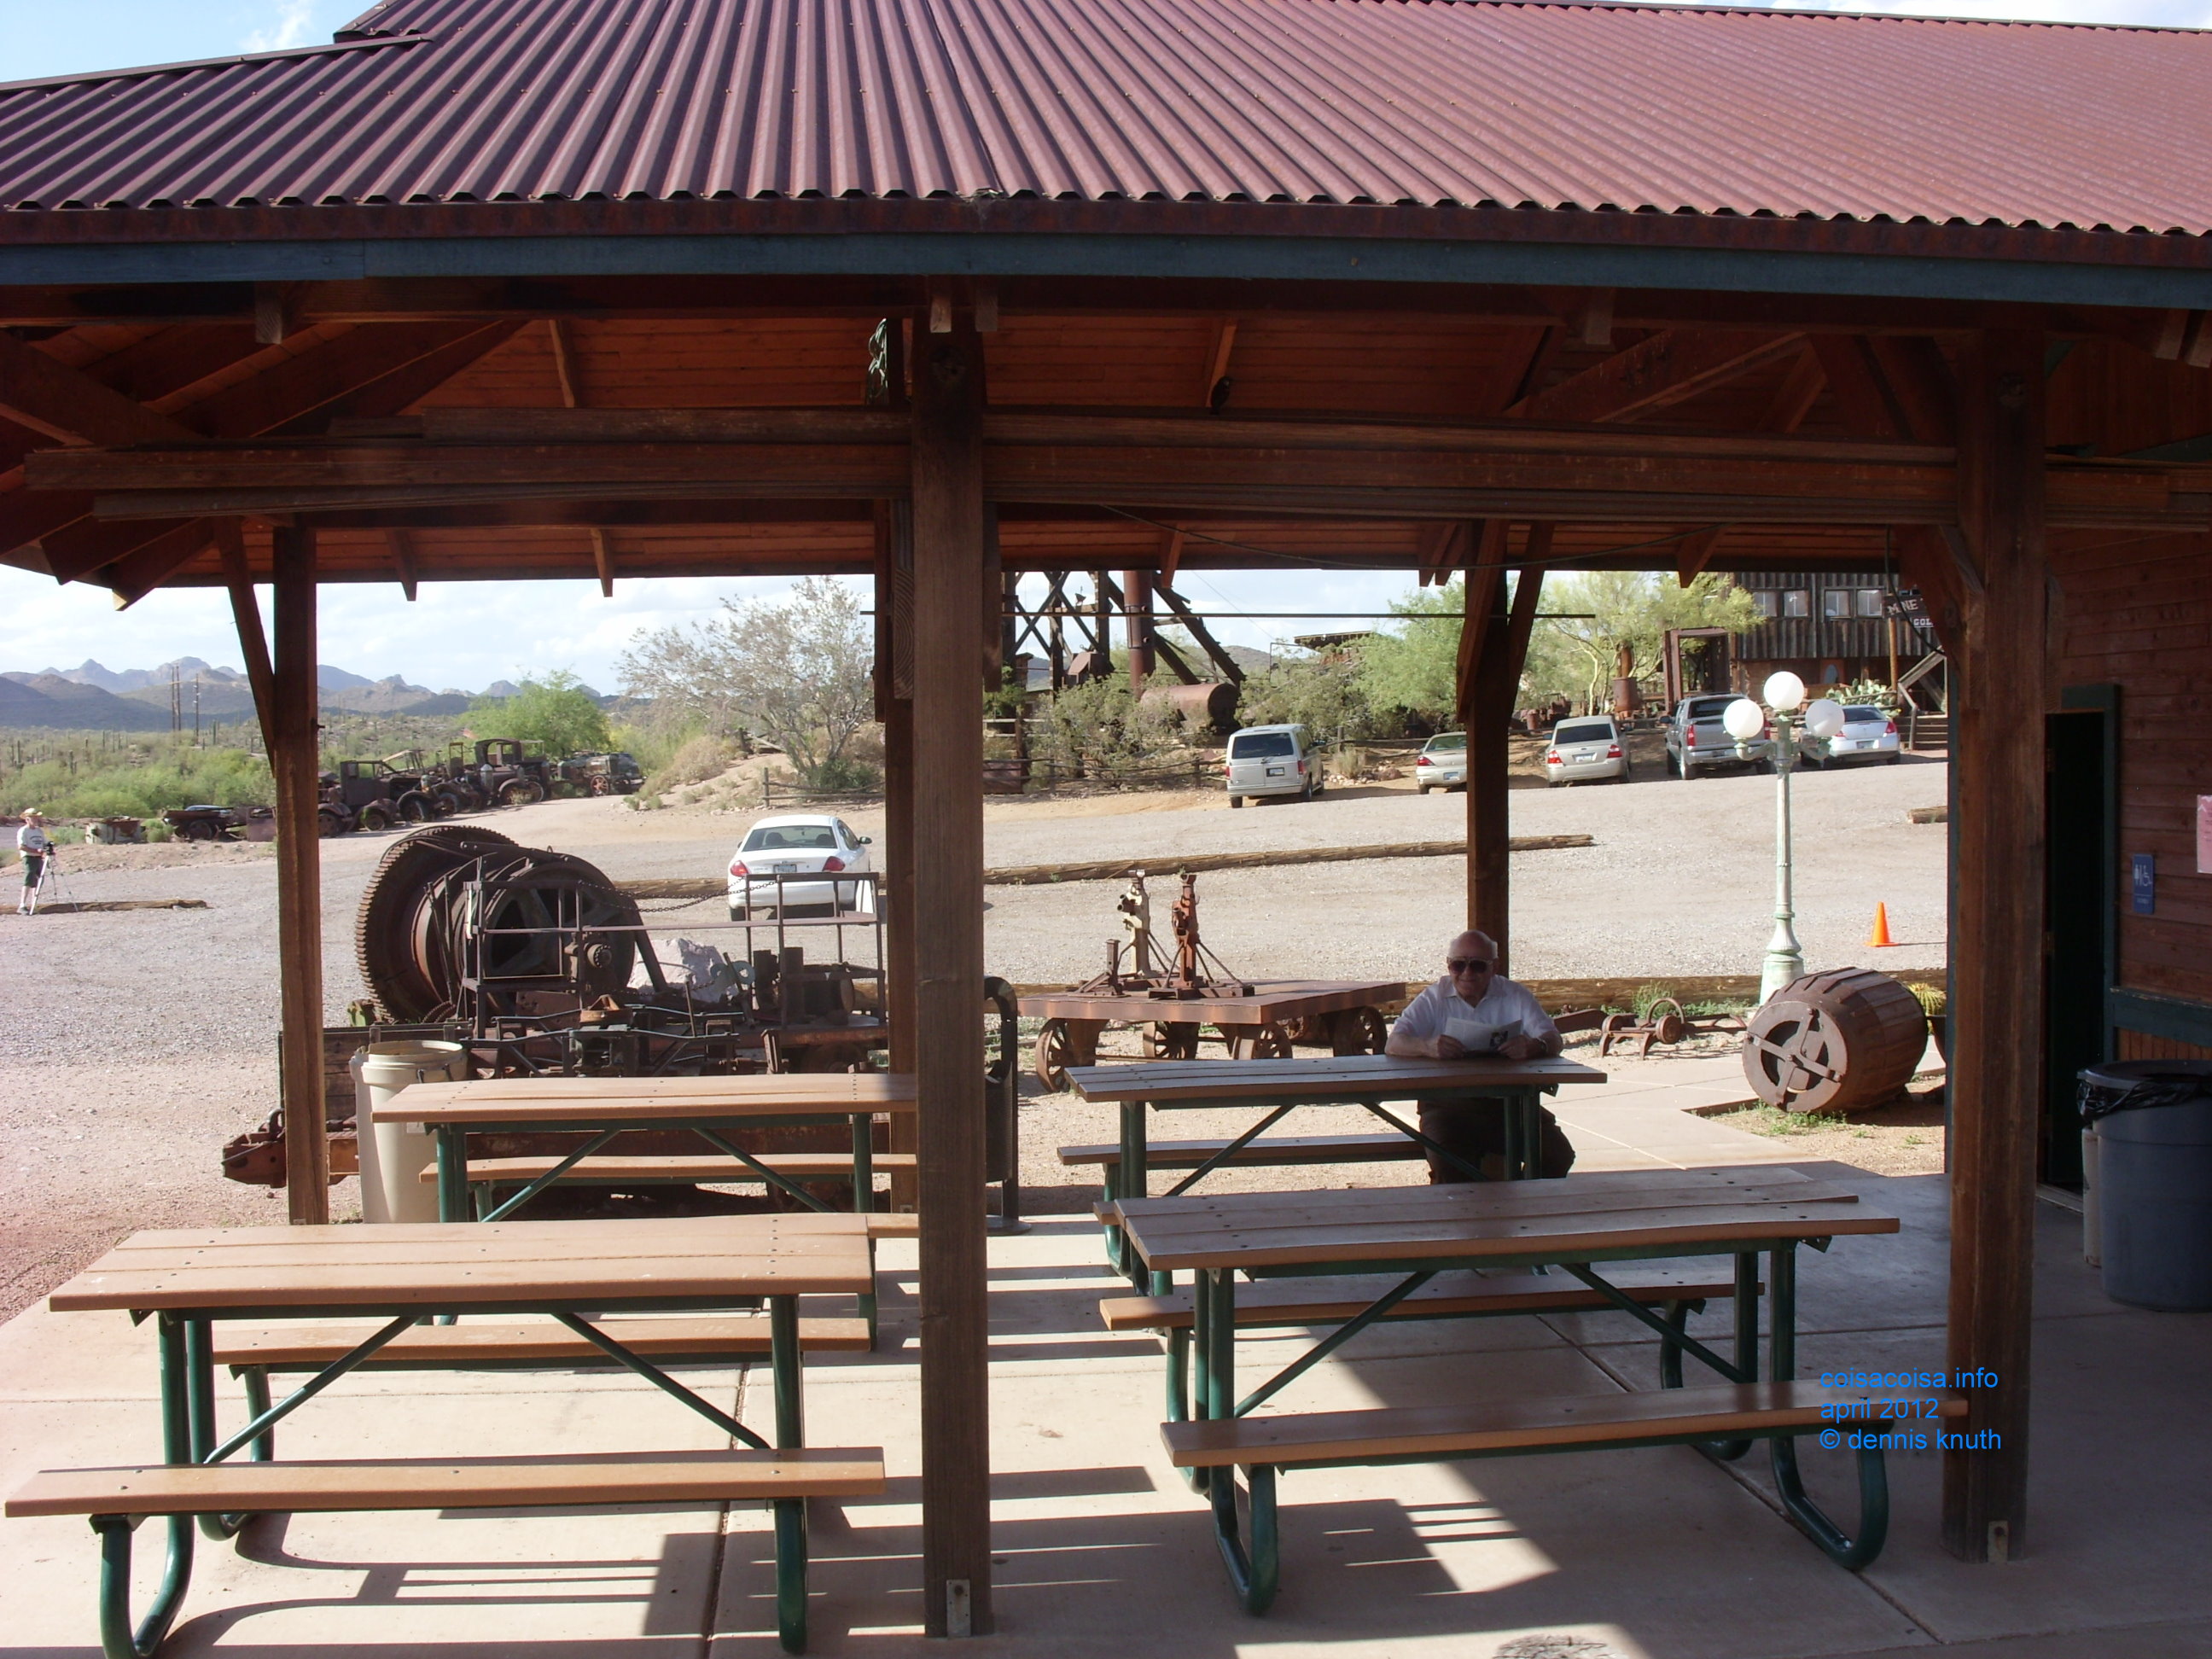 2012_04_26_e_apache_junction_ghost_town_0023.jpg (large)